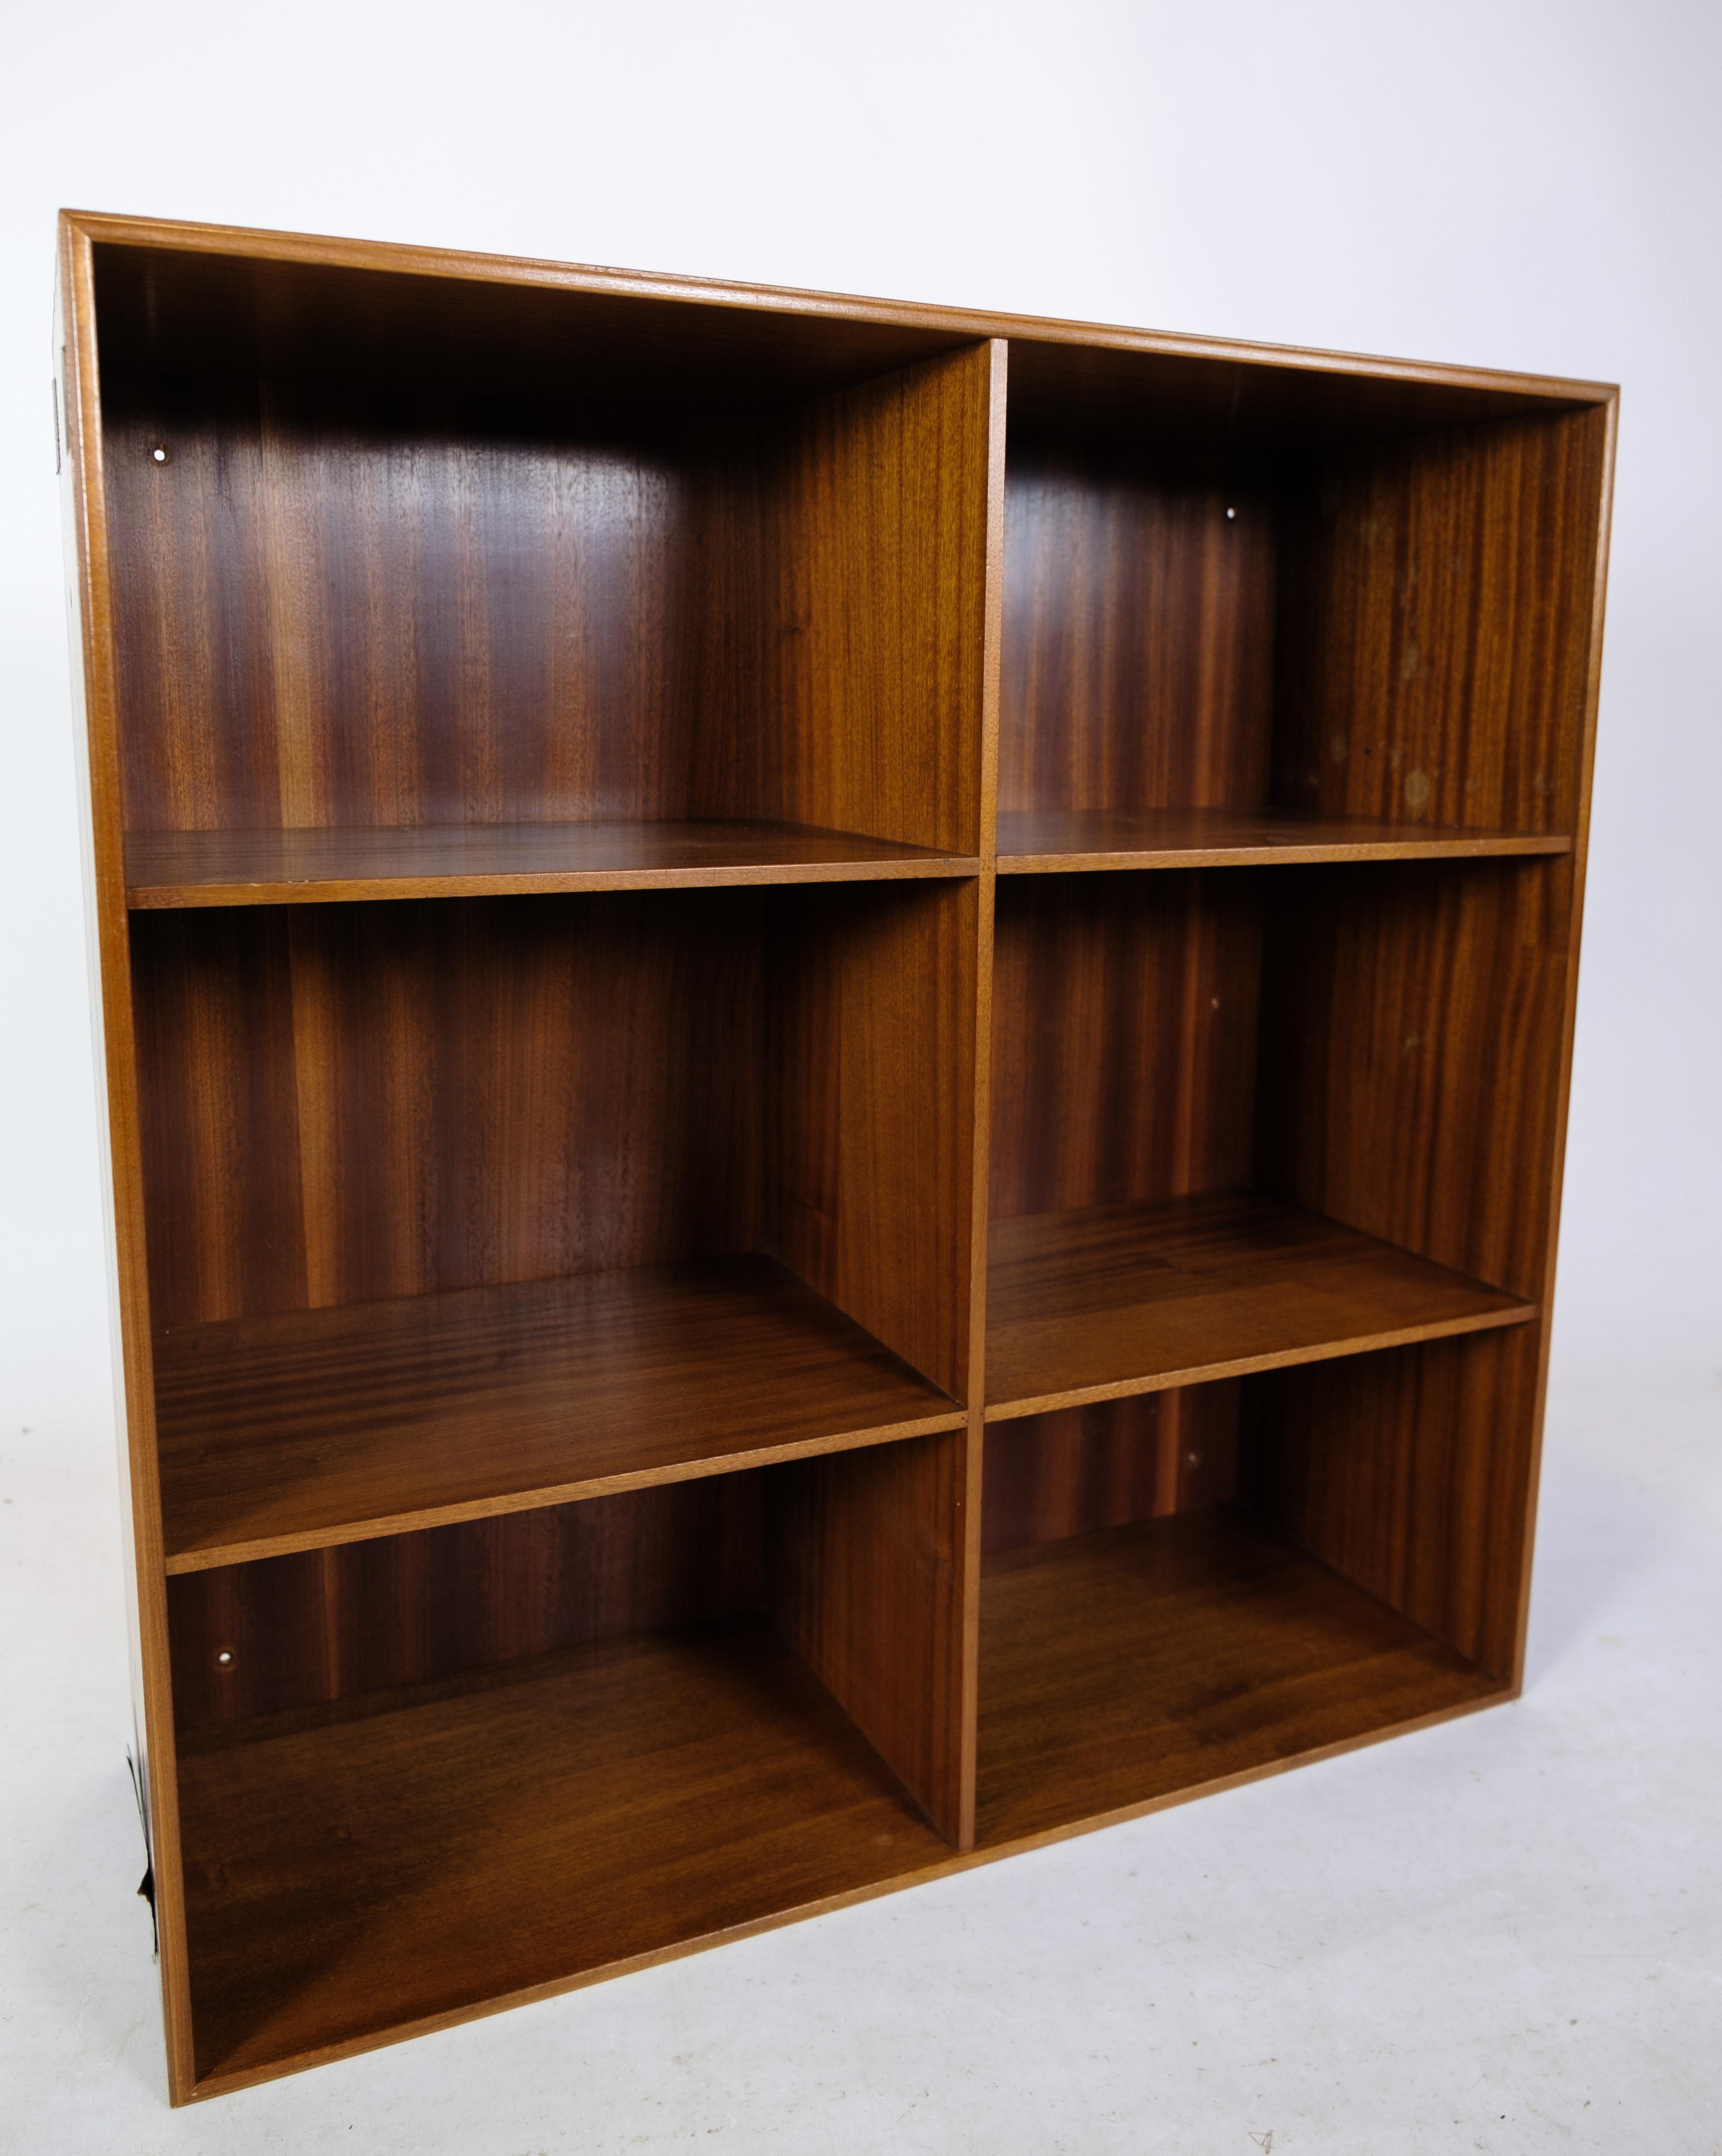 The light mahogany bookcase, designed by Mogens Koch and manufactured by Rud Rasmussen in the 1960s, is a remarkable piece of furniture that represents a harmonious fusion of functionality and aesthetics.

Mogens Koch, a renowned Danish furniture